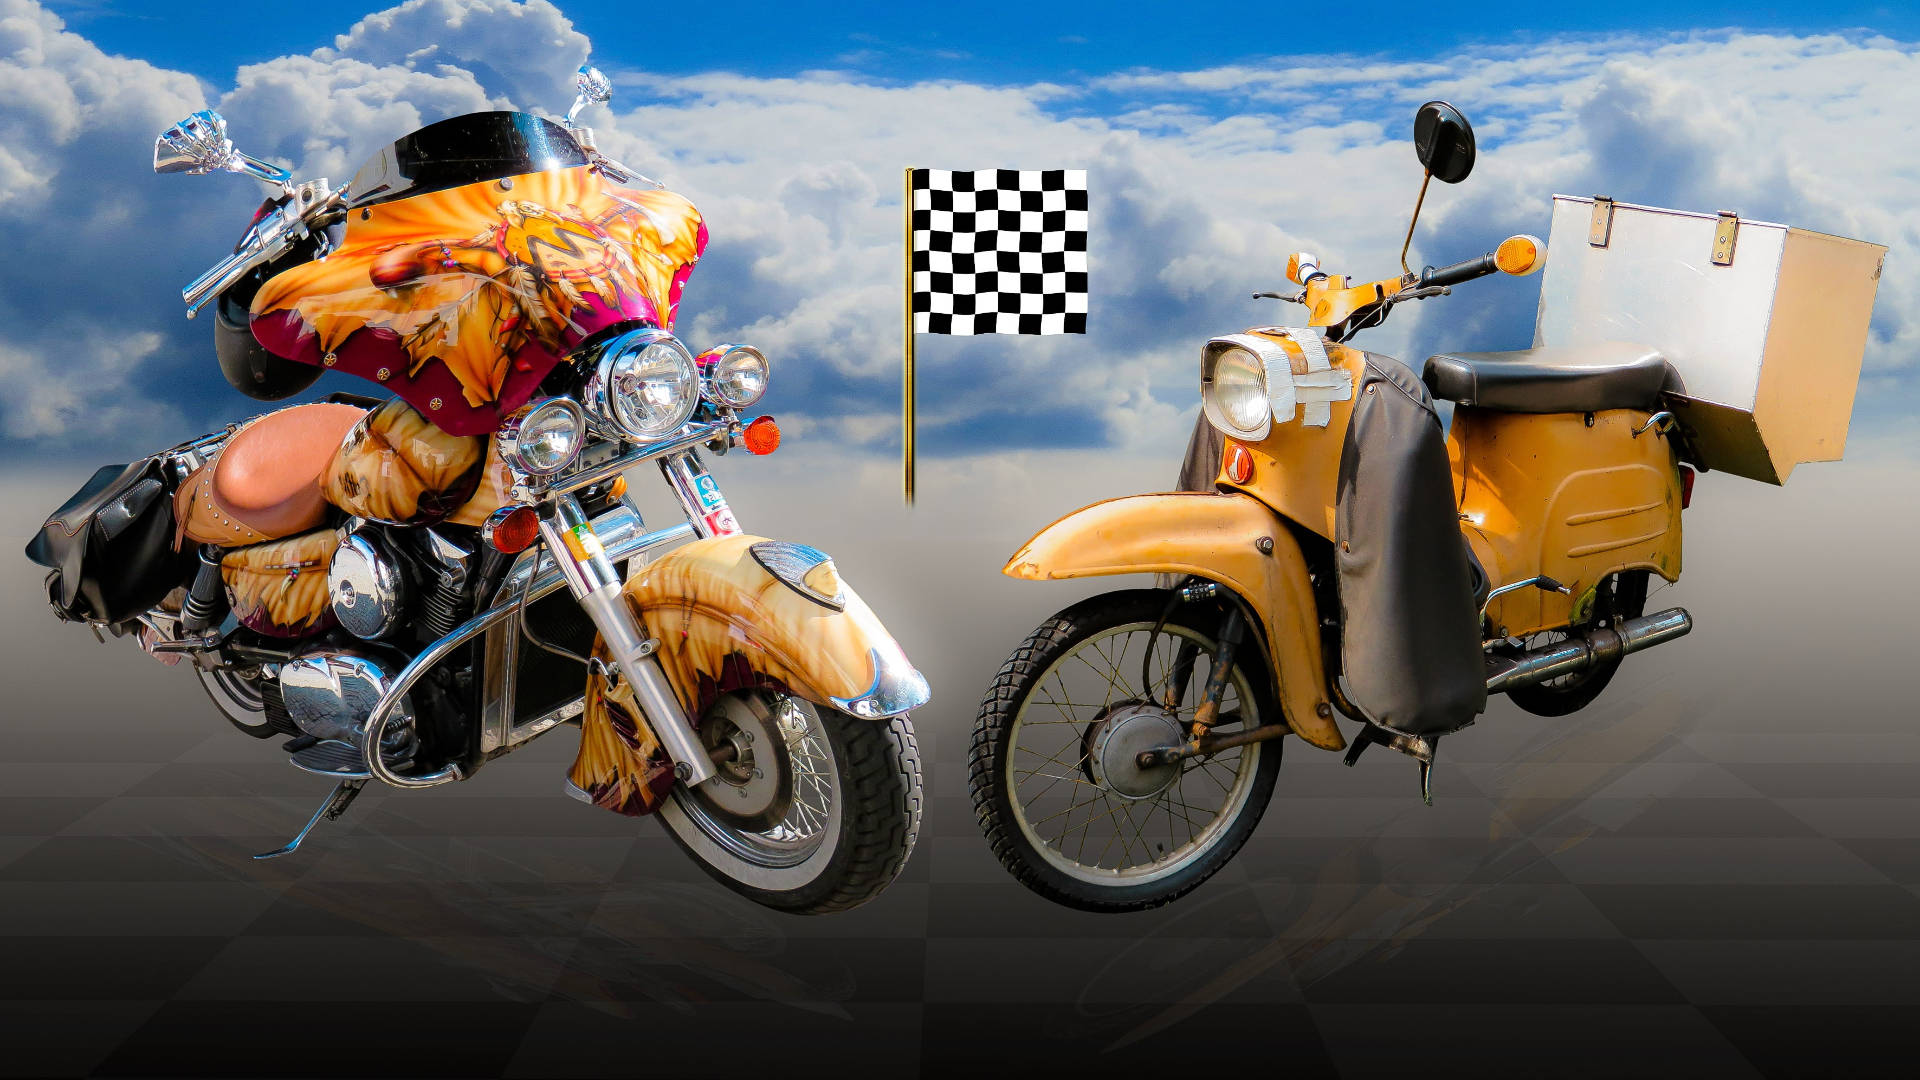 Two Motorcycles With Checkered Flag Background